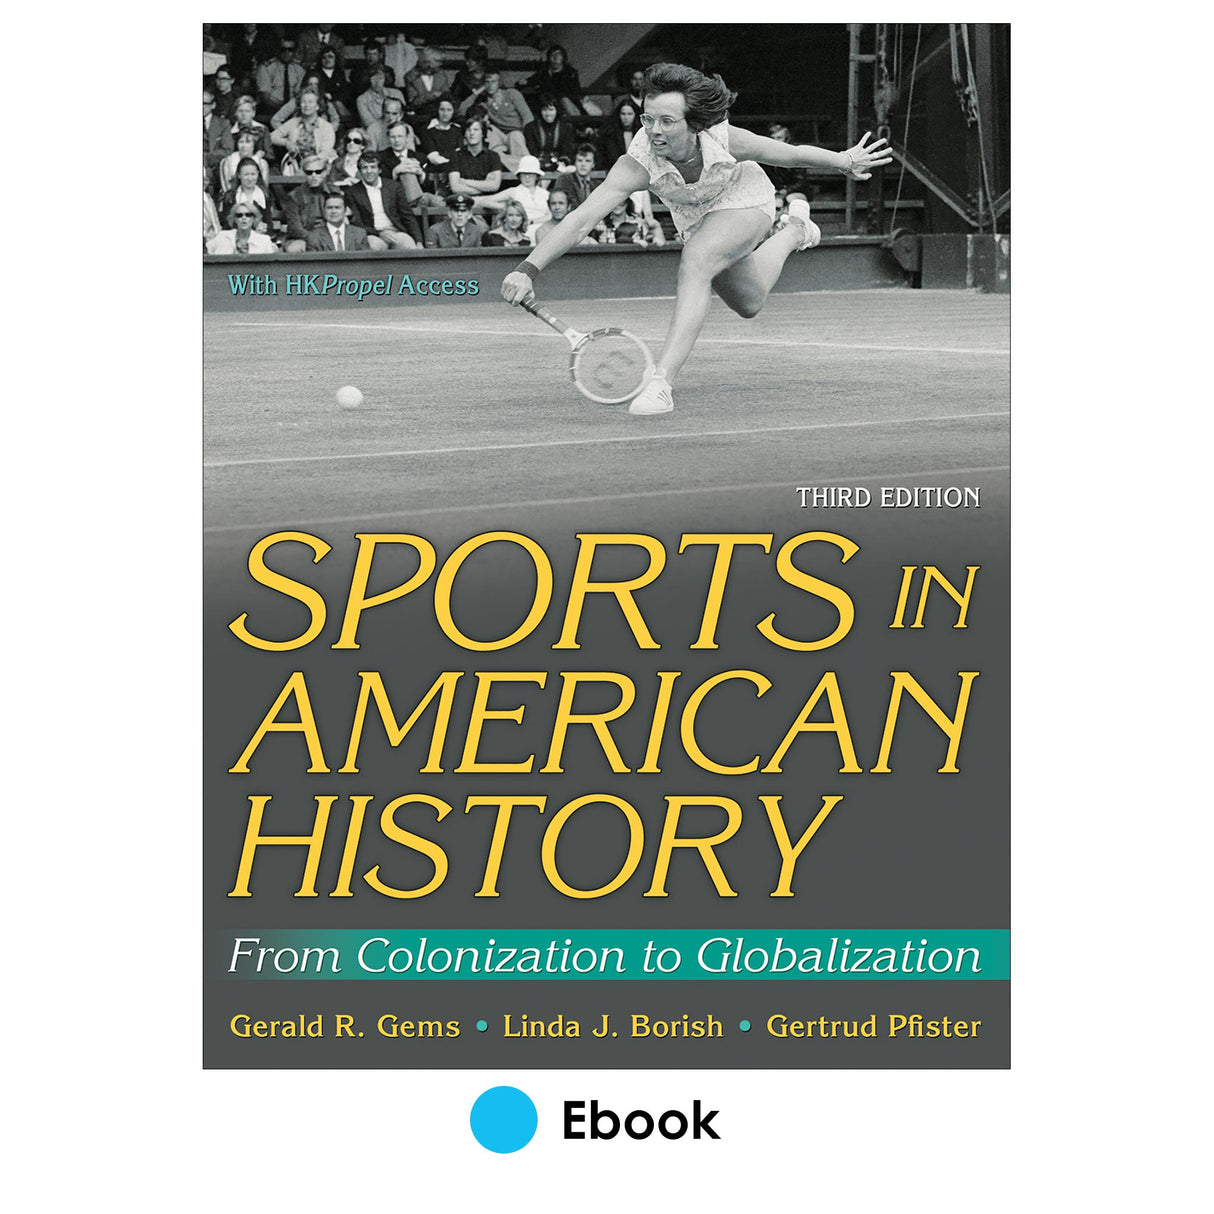 Sports in American History 3rd Edition Ebook With HKPropel Access